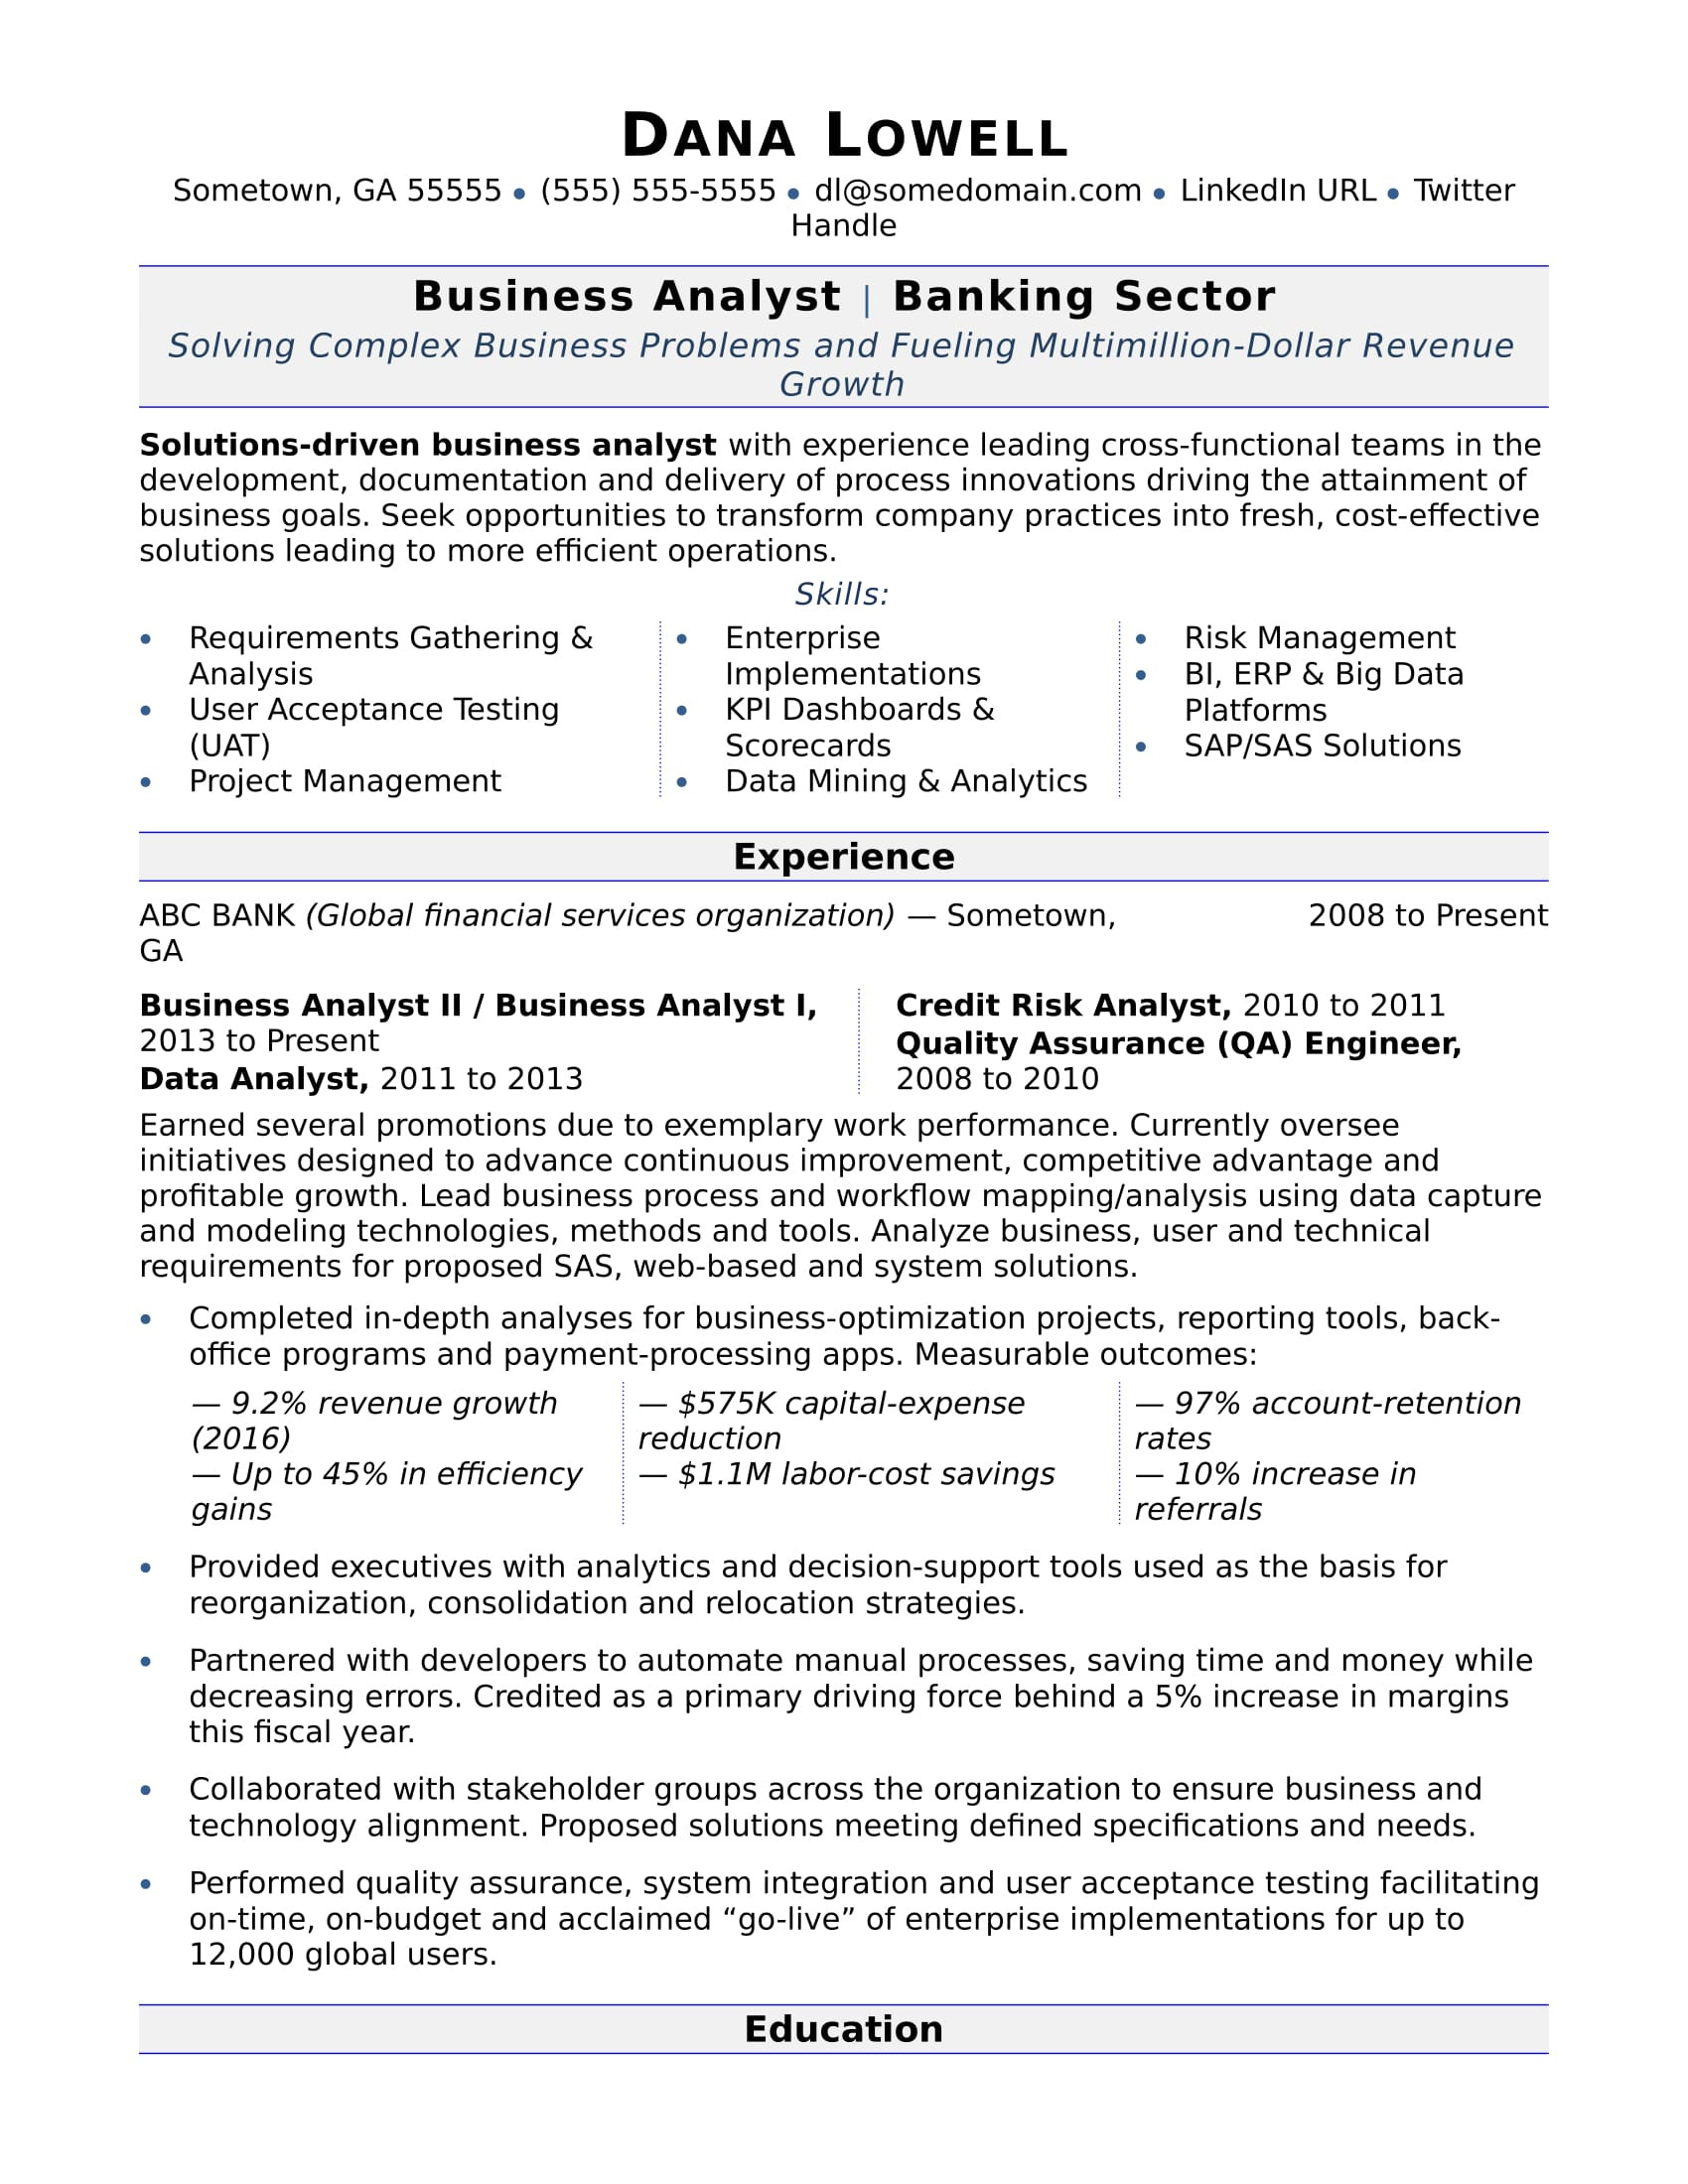 First Data Business Analyst Sample Resume Business Analyst Resume Monster.com